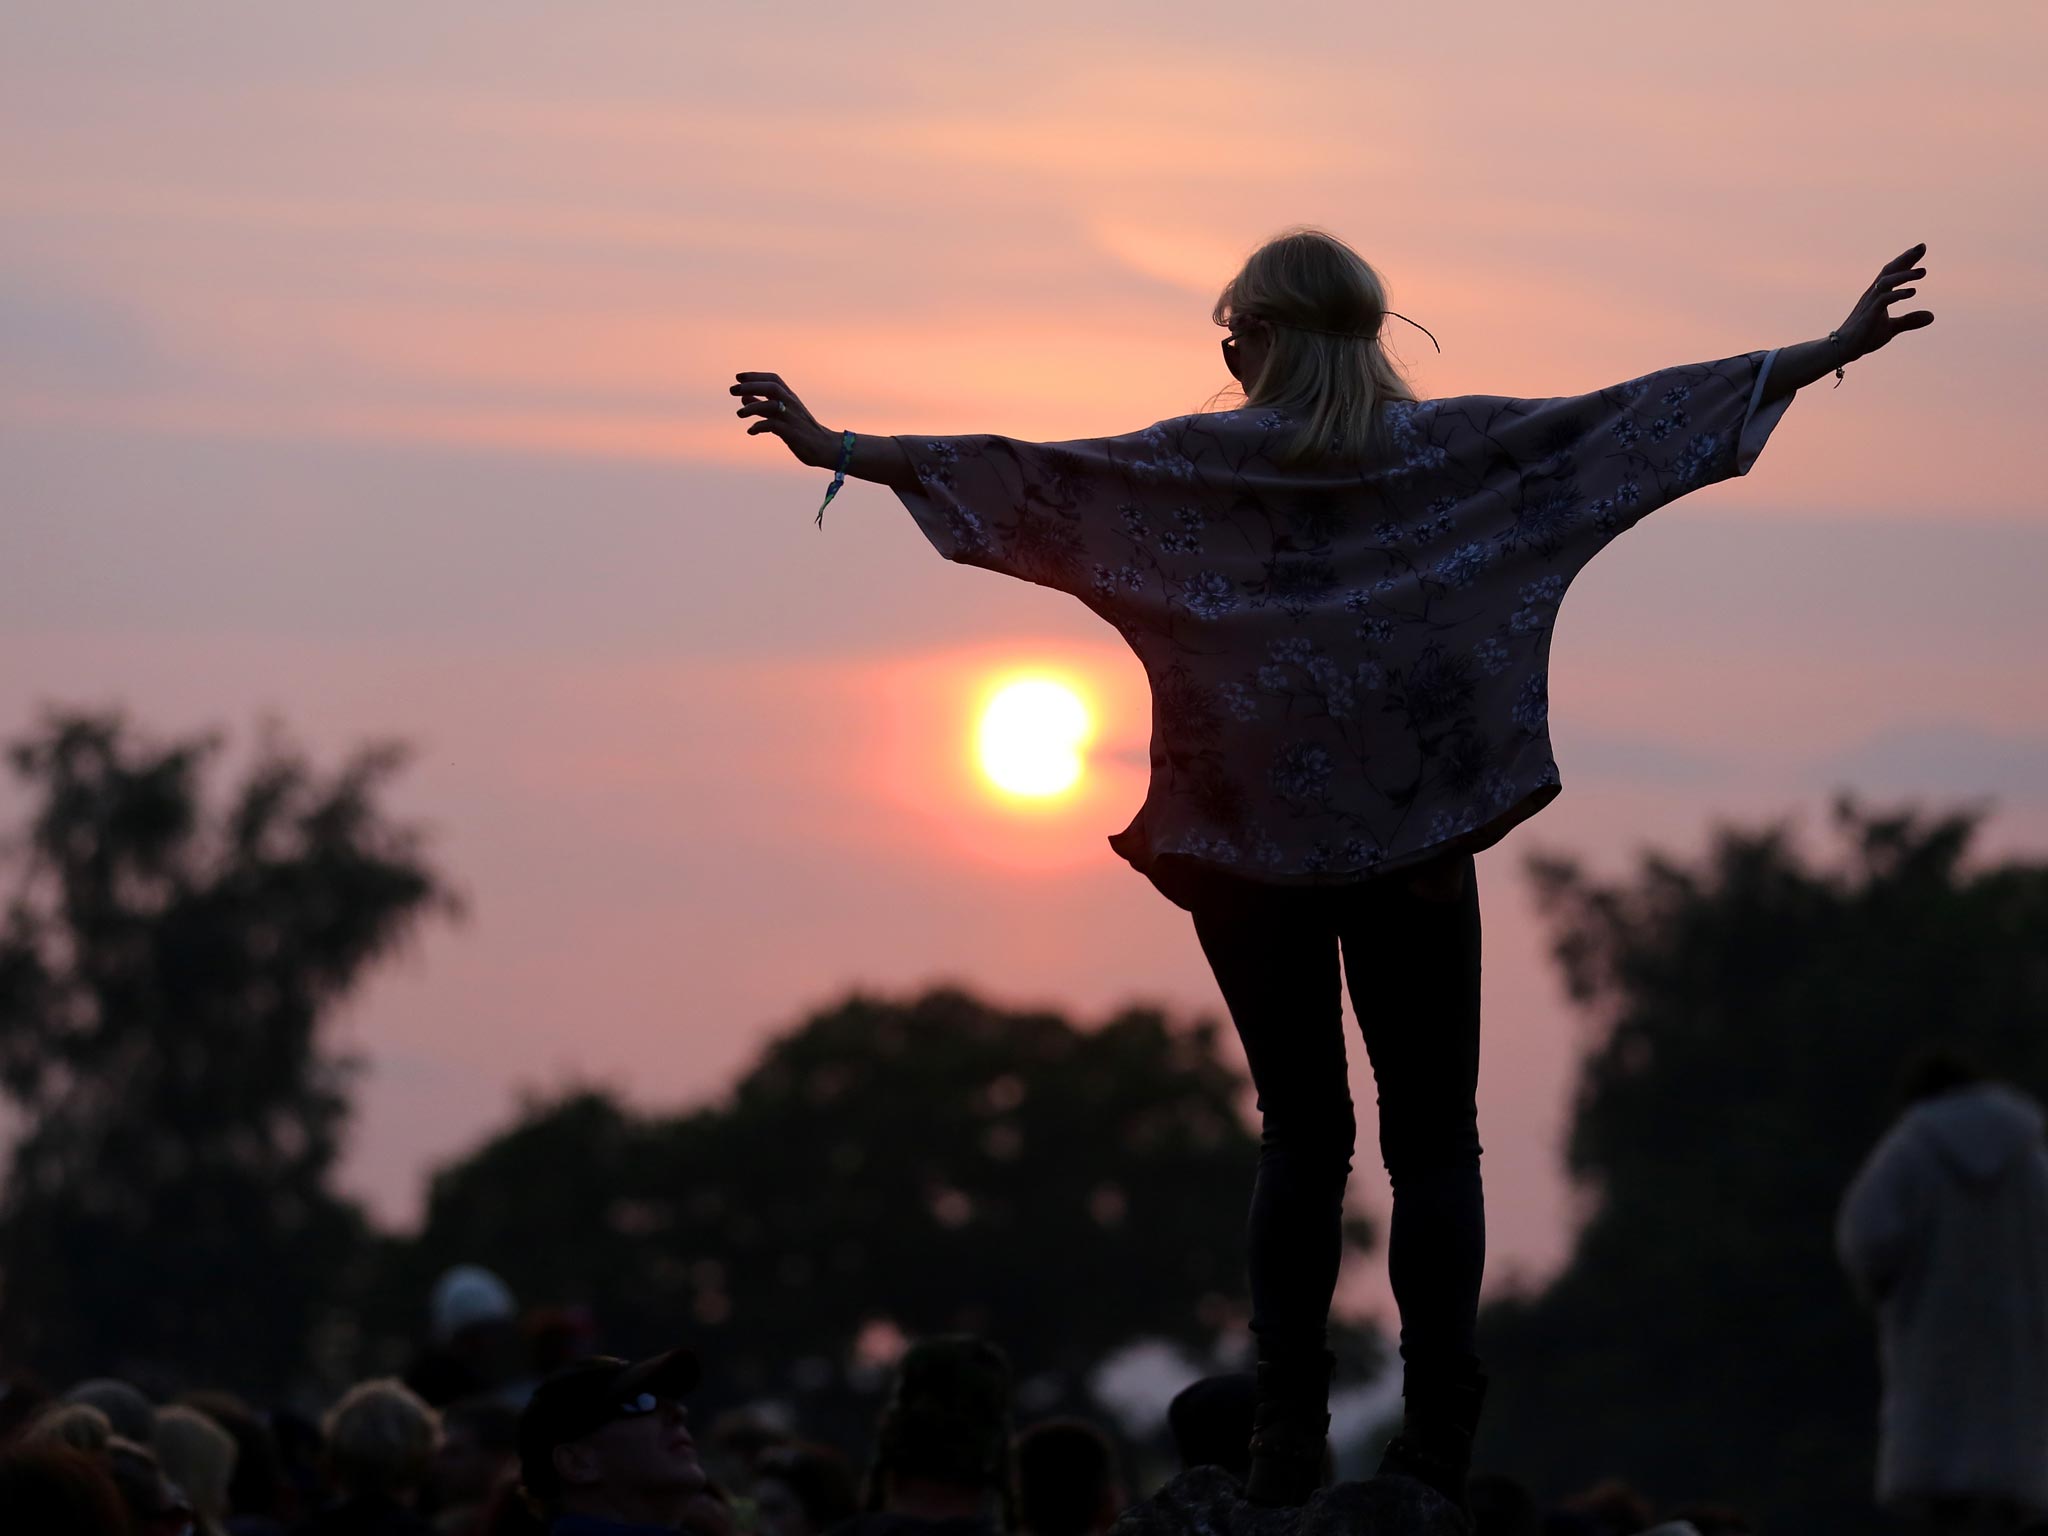 Glastonbury can be a hippie haven but even the most hardened hippies can get robbed